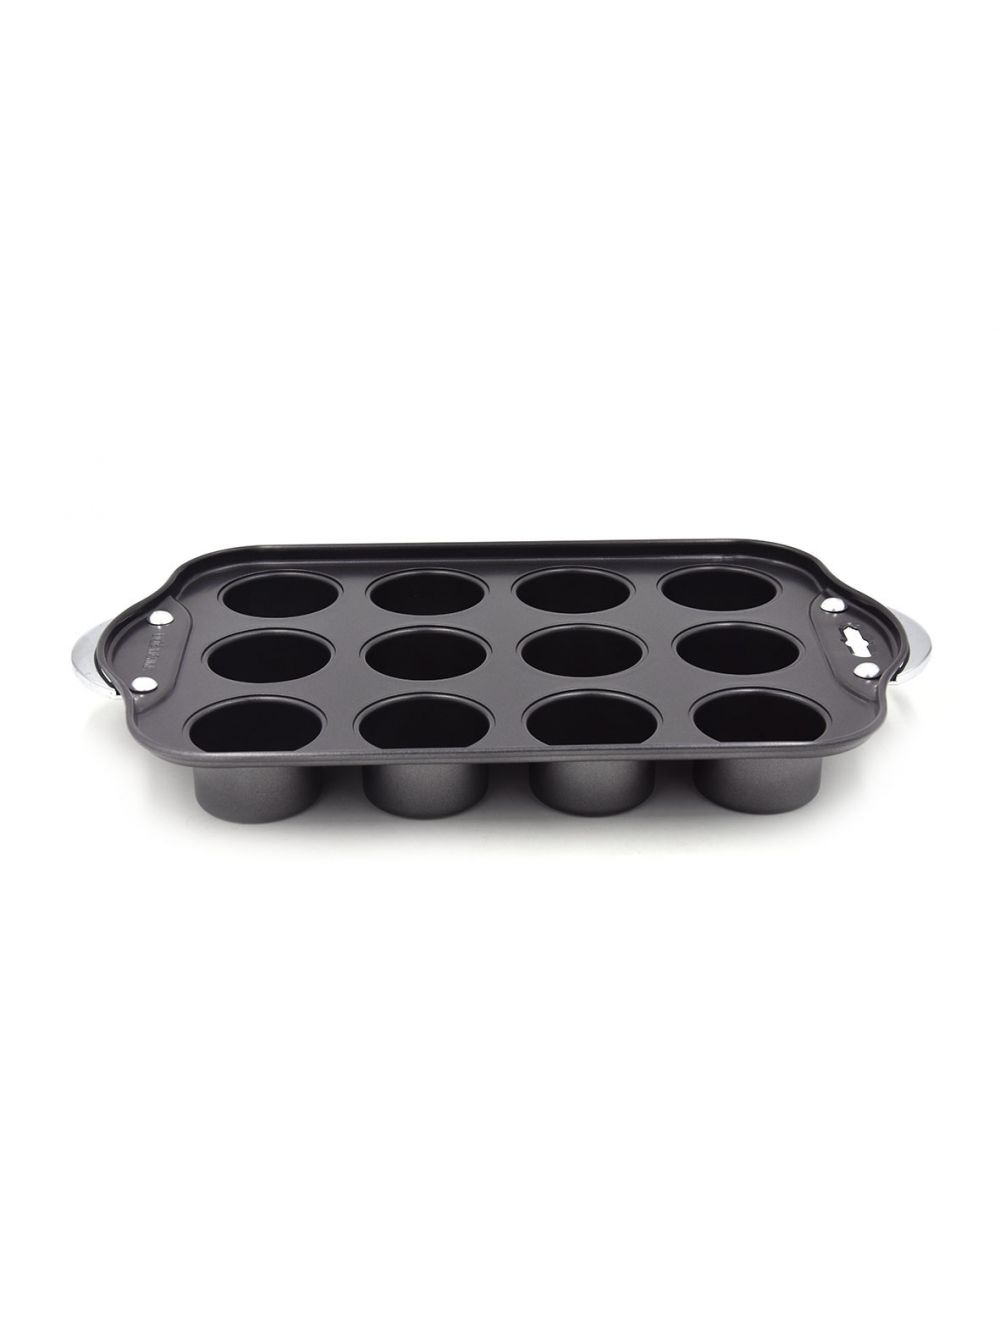 Muffin Pan 12 Division 35.5x21x4.8 cm